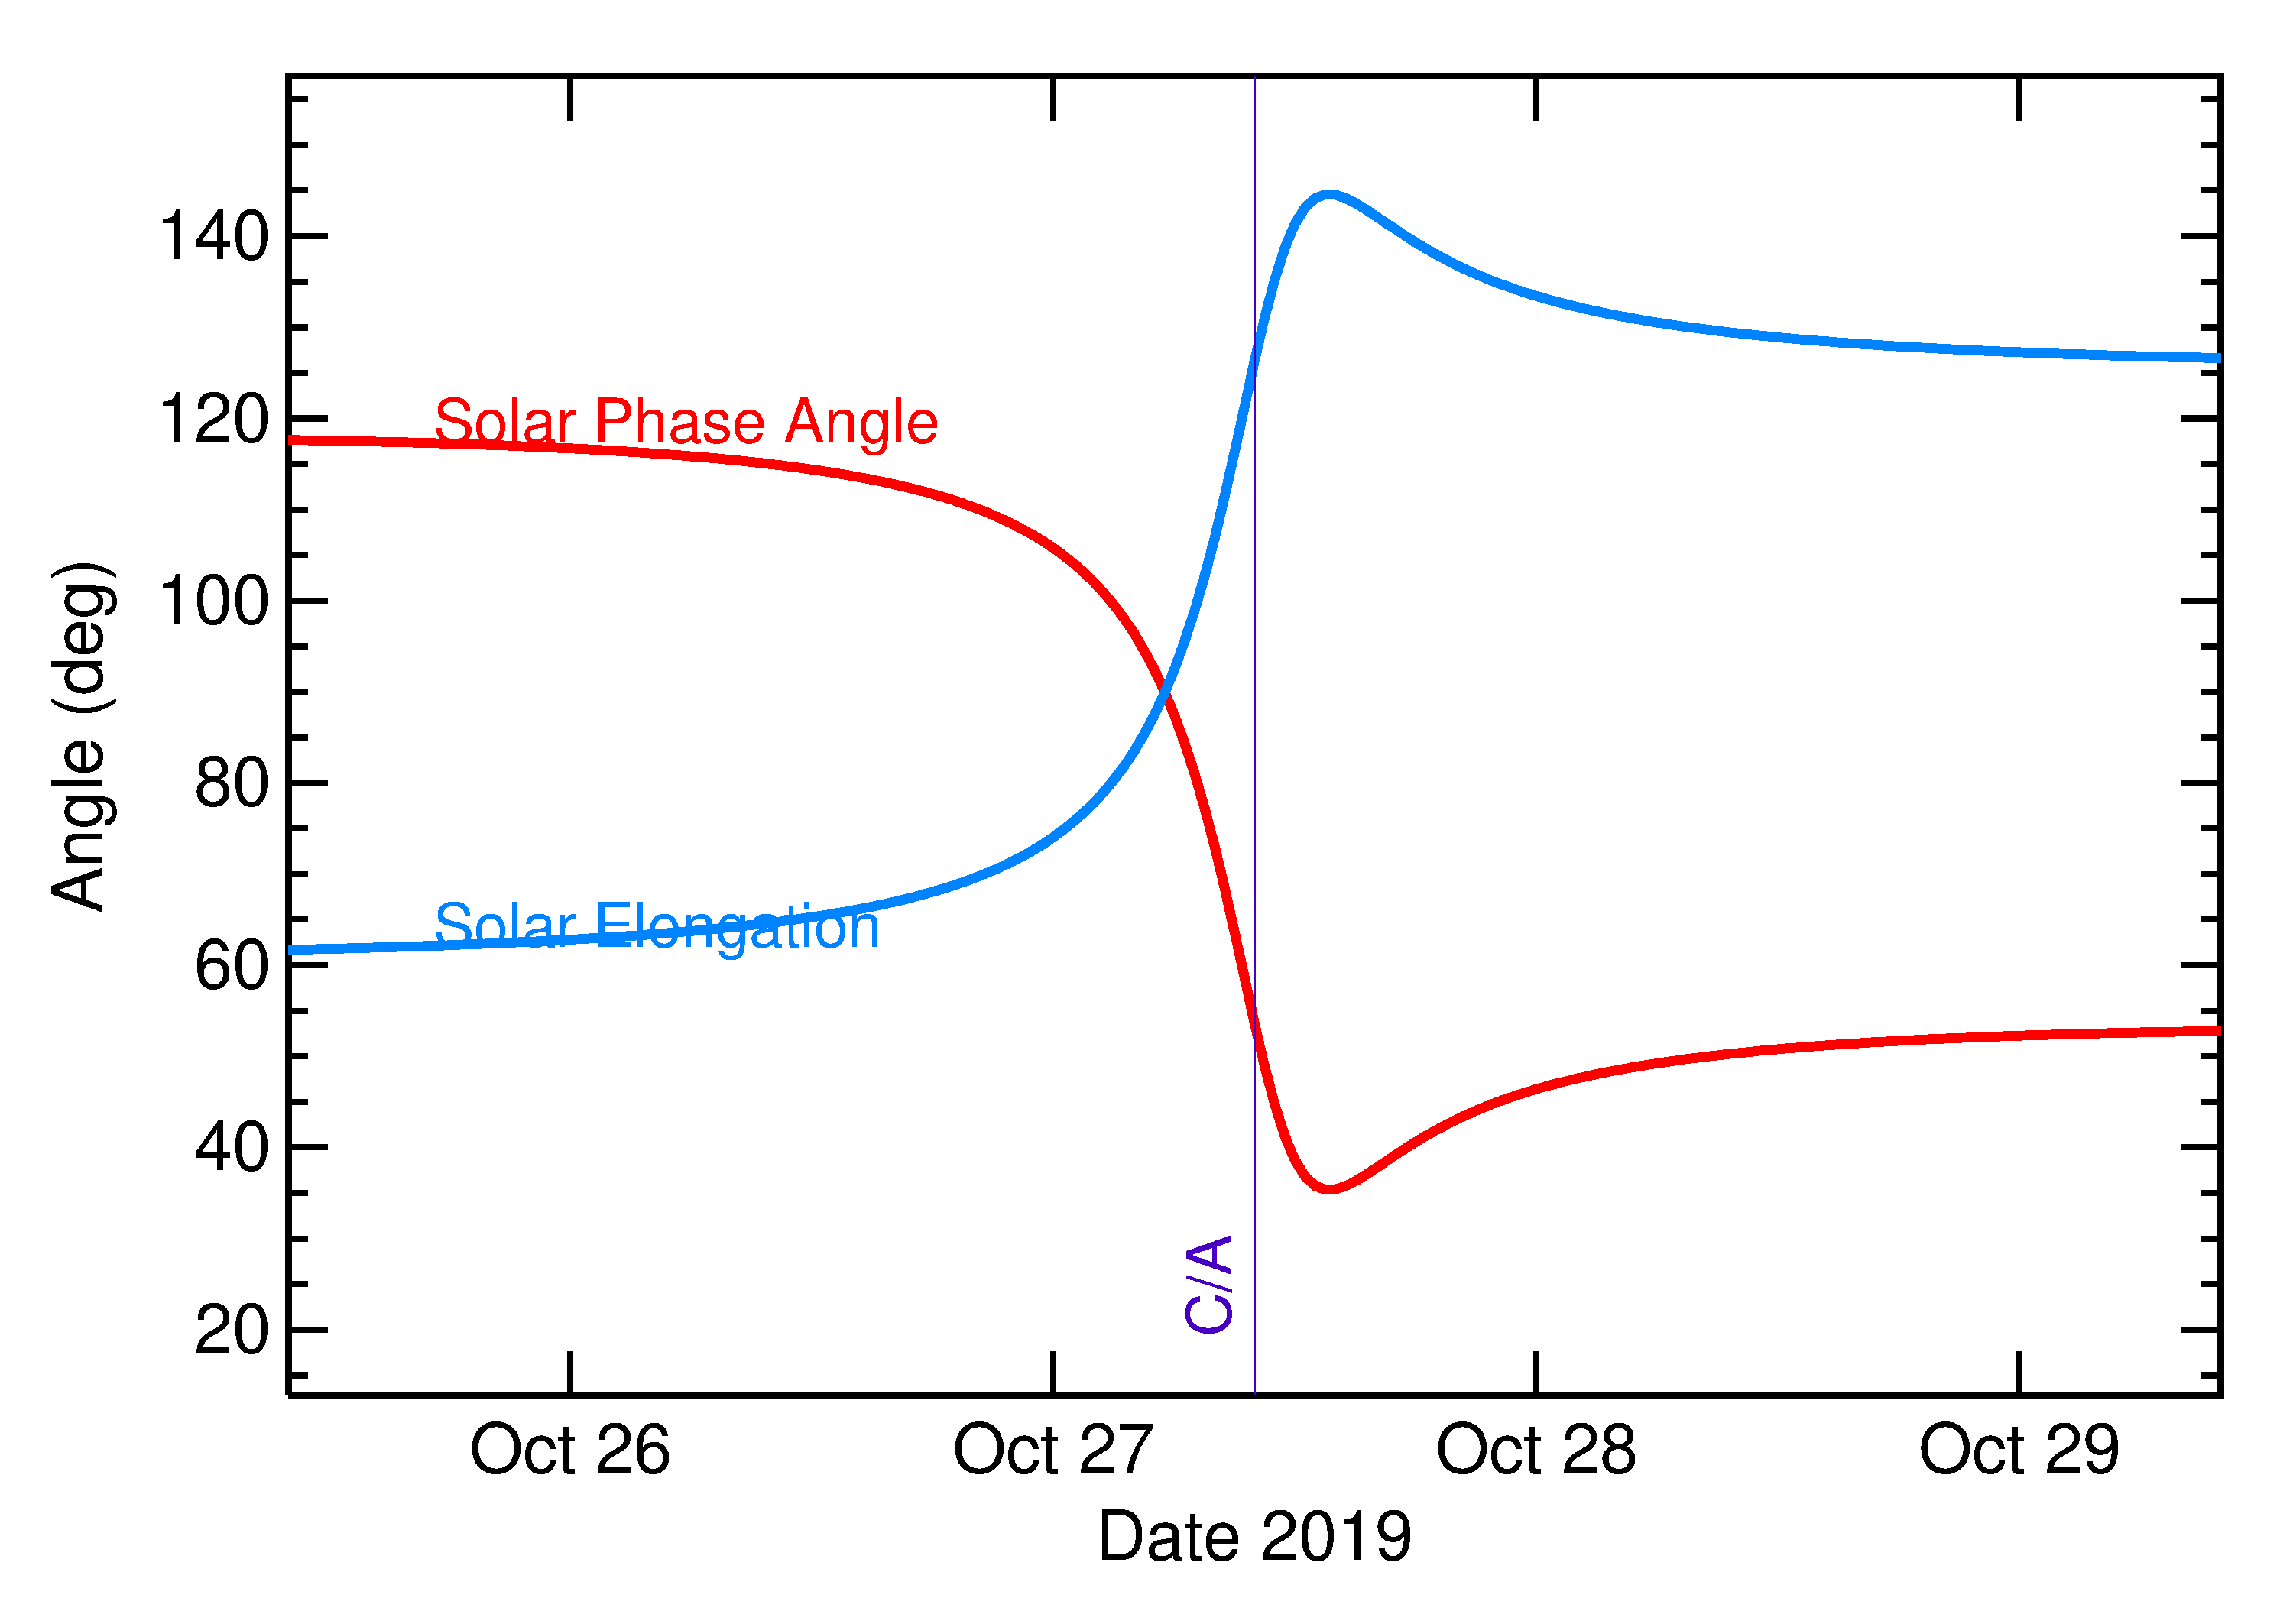 Solar Elongation and Solar Phase Angle of 2019 UD10 in the days around closest approach